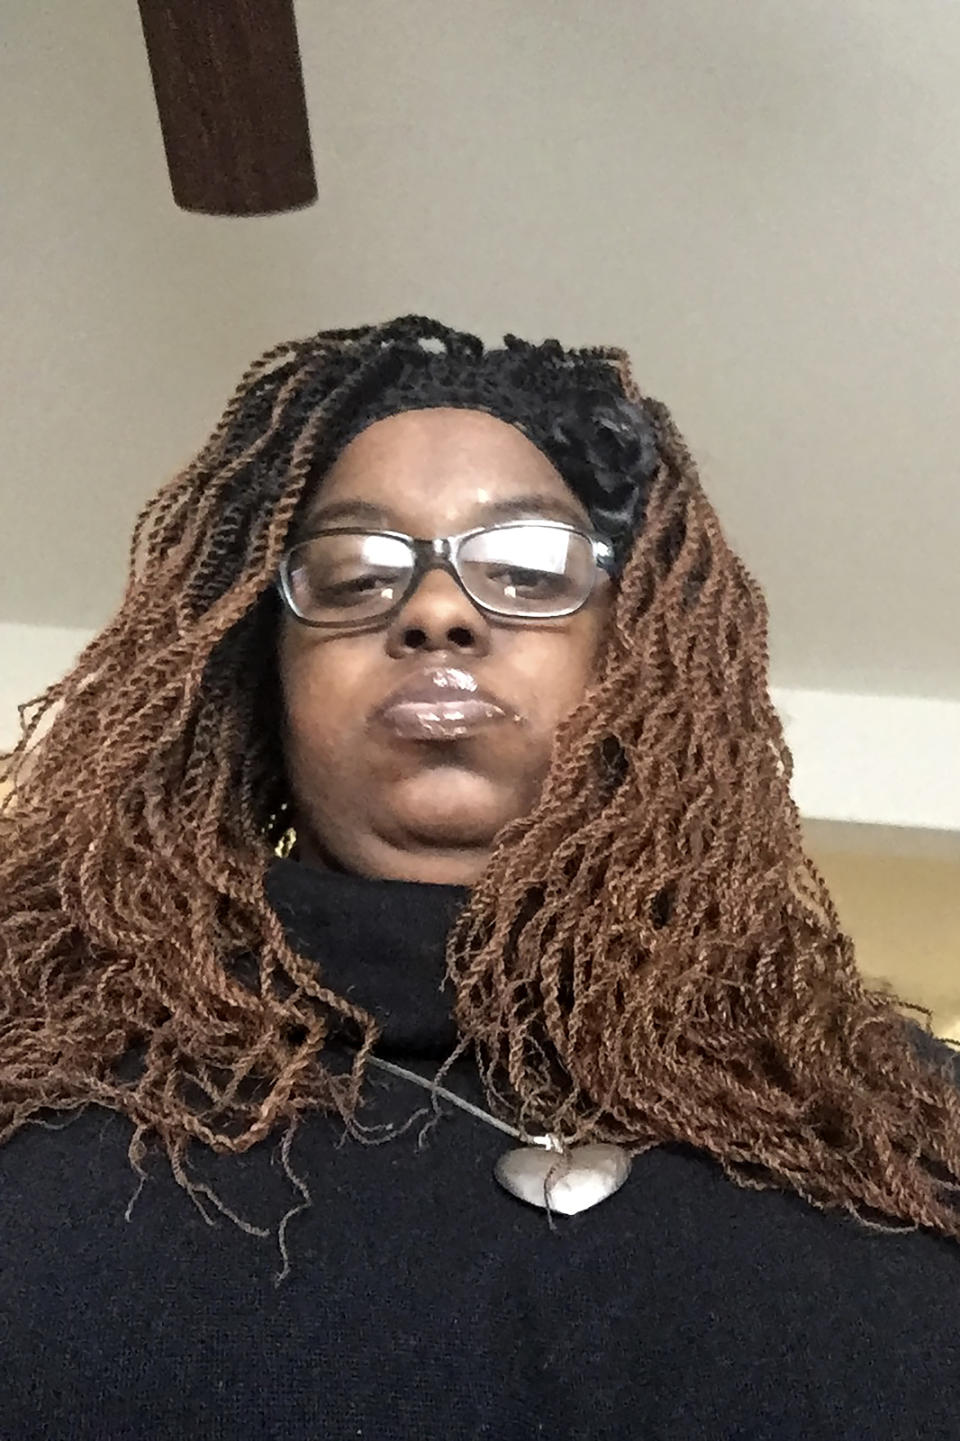 FILE - In this 2020 file photo provided by Ruqayyah Bailey, Ruqayyah Bailey, of St. Louis County, Mo., poses for a selfie. Bailey has lost much of her independence and wants to get her life back on track. Bailey, 31, has autism. Until March, she lived in her own apartment, worked part time as a cashier at a St. Louis cafe, and attended college. The coronavirus tossed all that structure out the window. Bailey could no longer get the one-on-one tutoring that helped her thrive in college. The cafe closed. With no money coming in, she moved back in with her mother. (Ruqayyah Bailey via AP, File)